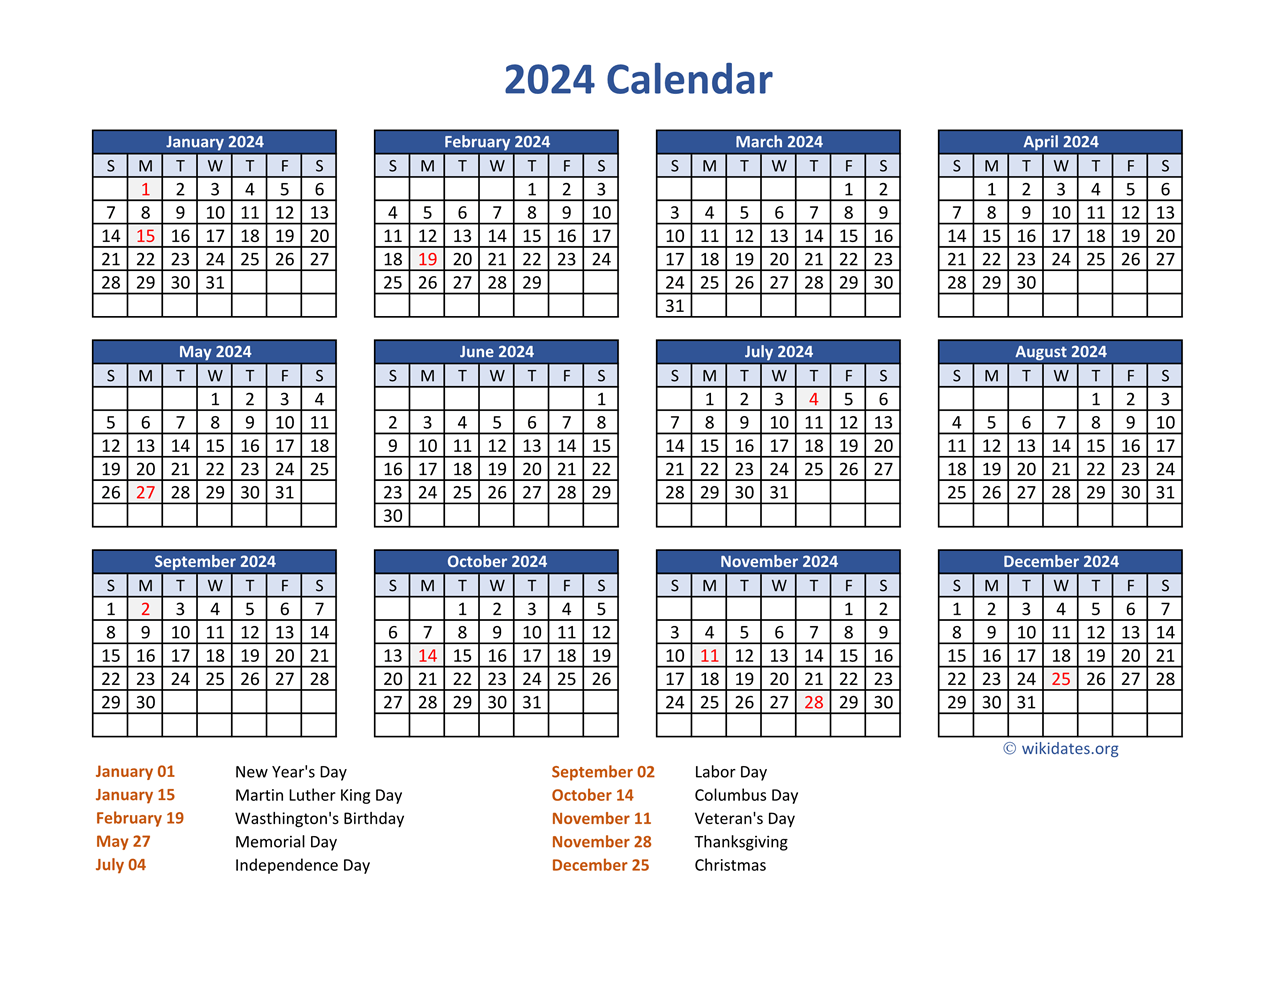 Pdf Calendar 2024 With Federal Holidays | Wikidates for 2024 Calendar Printable With Holidays